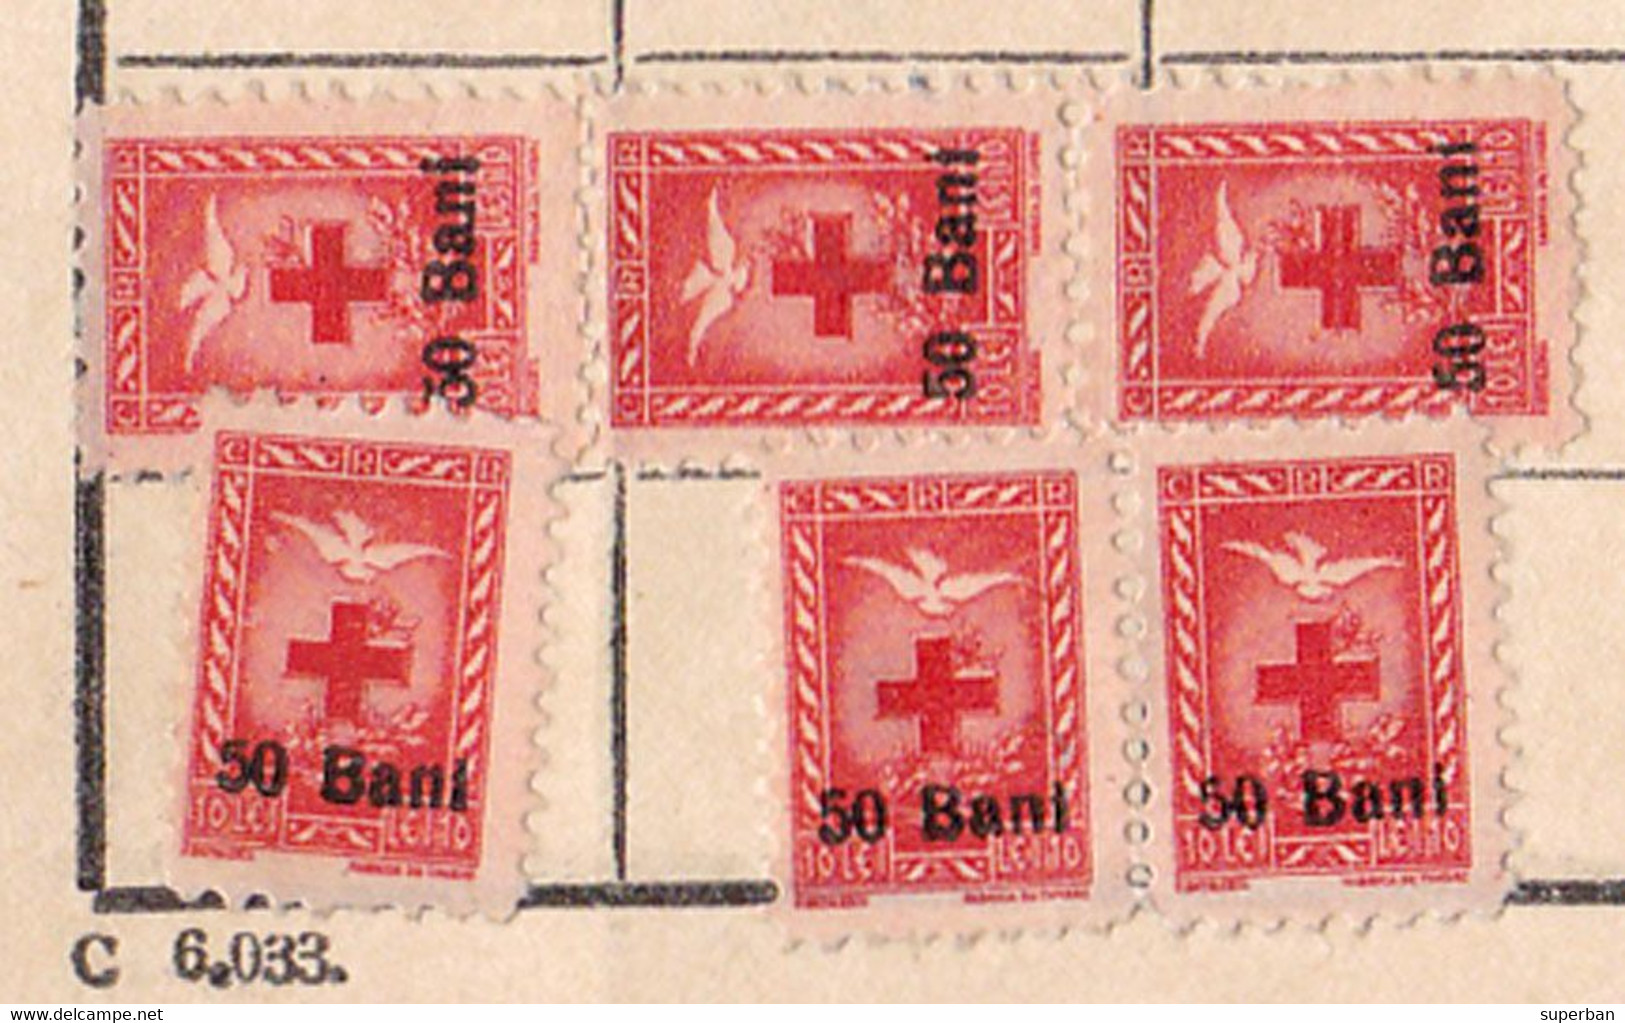 CRUCEA ROSIE / CROIX ROUGE / RED CROSS - DUES TICKET - 9 TIMBRES : 50 BANI / 10 LEI - 1952 / 1953 - CINDERELLA (ai406) - Fiscaux